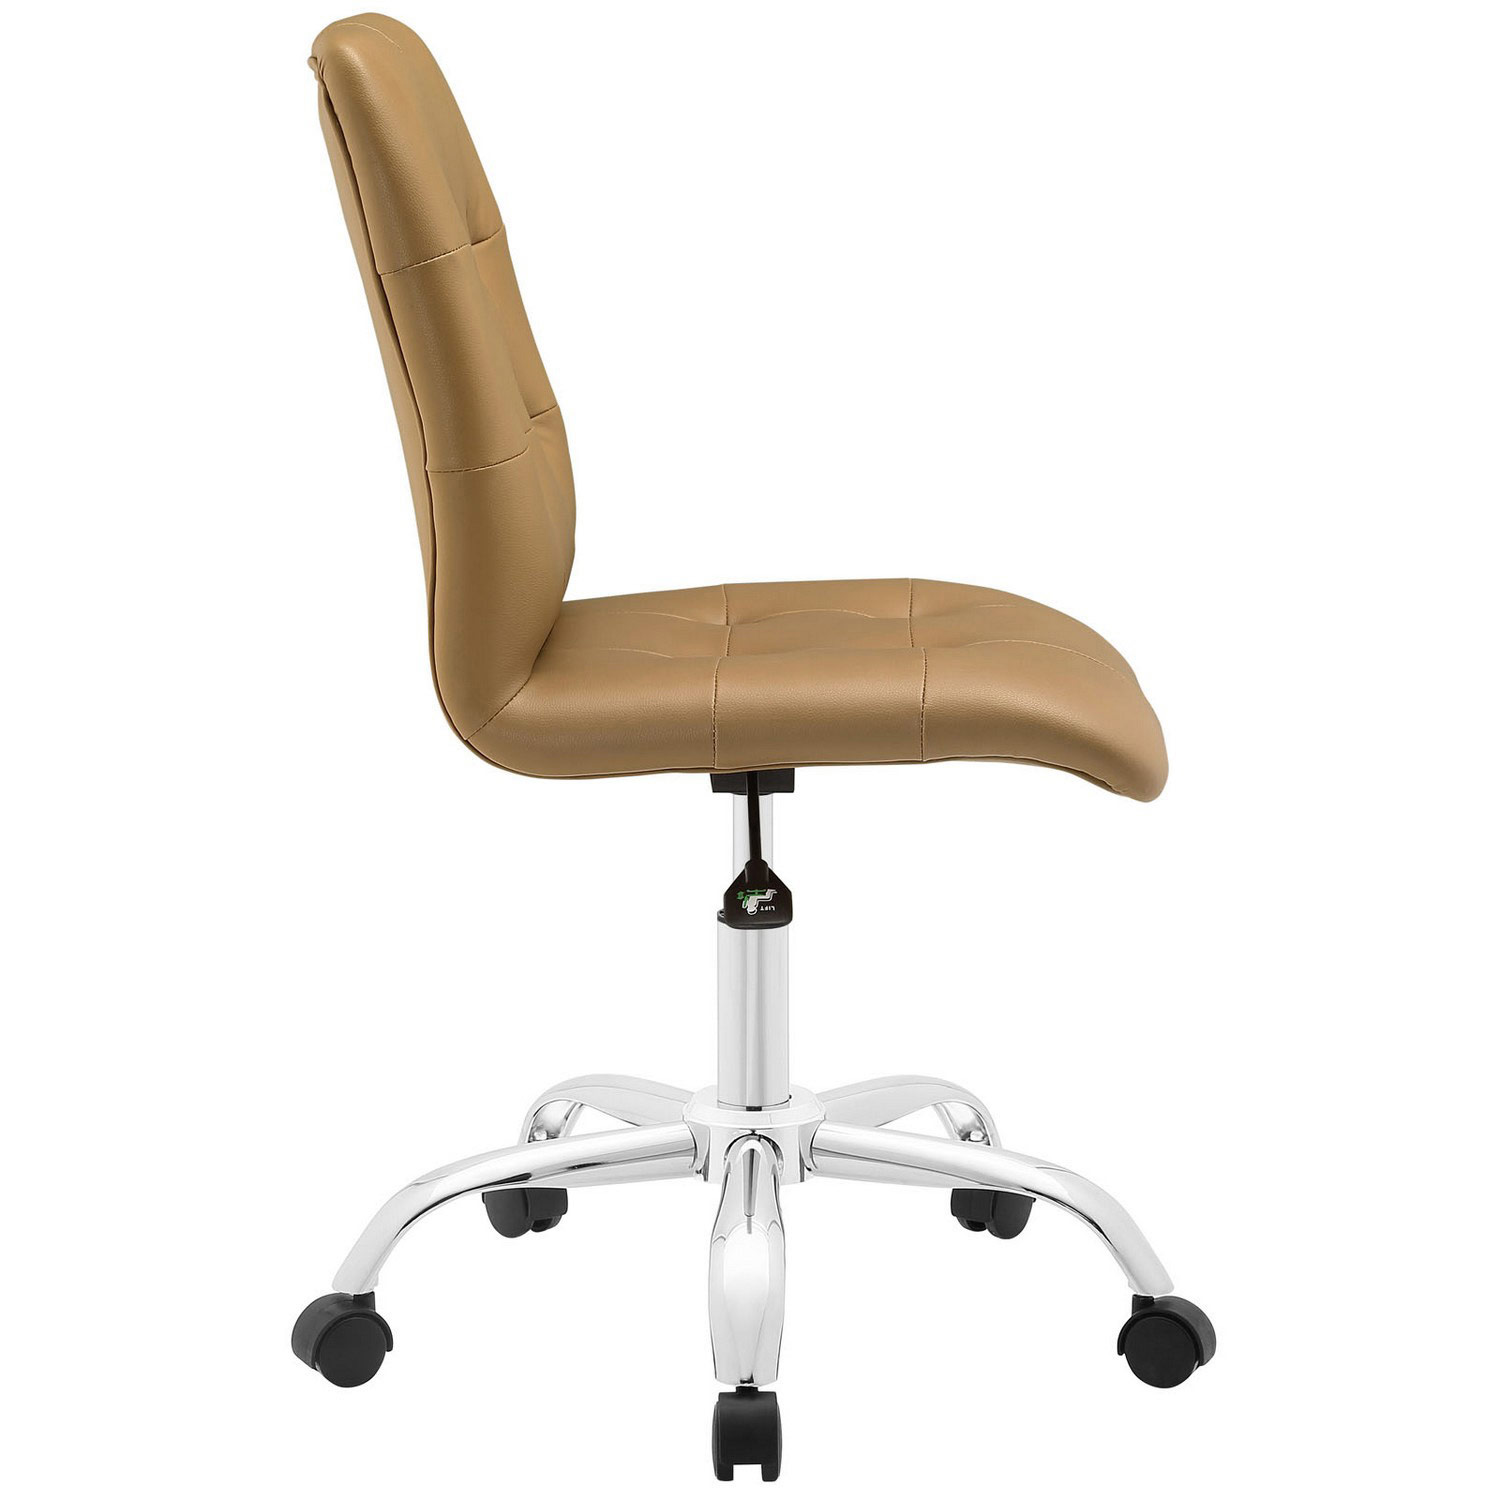 Modway Prim Armless Mid Back Office Chair - Tan